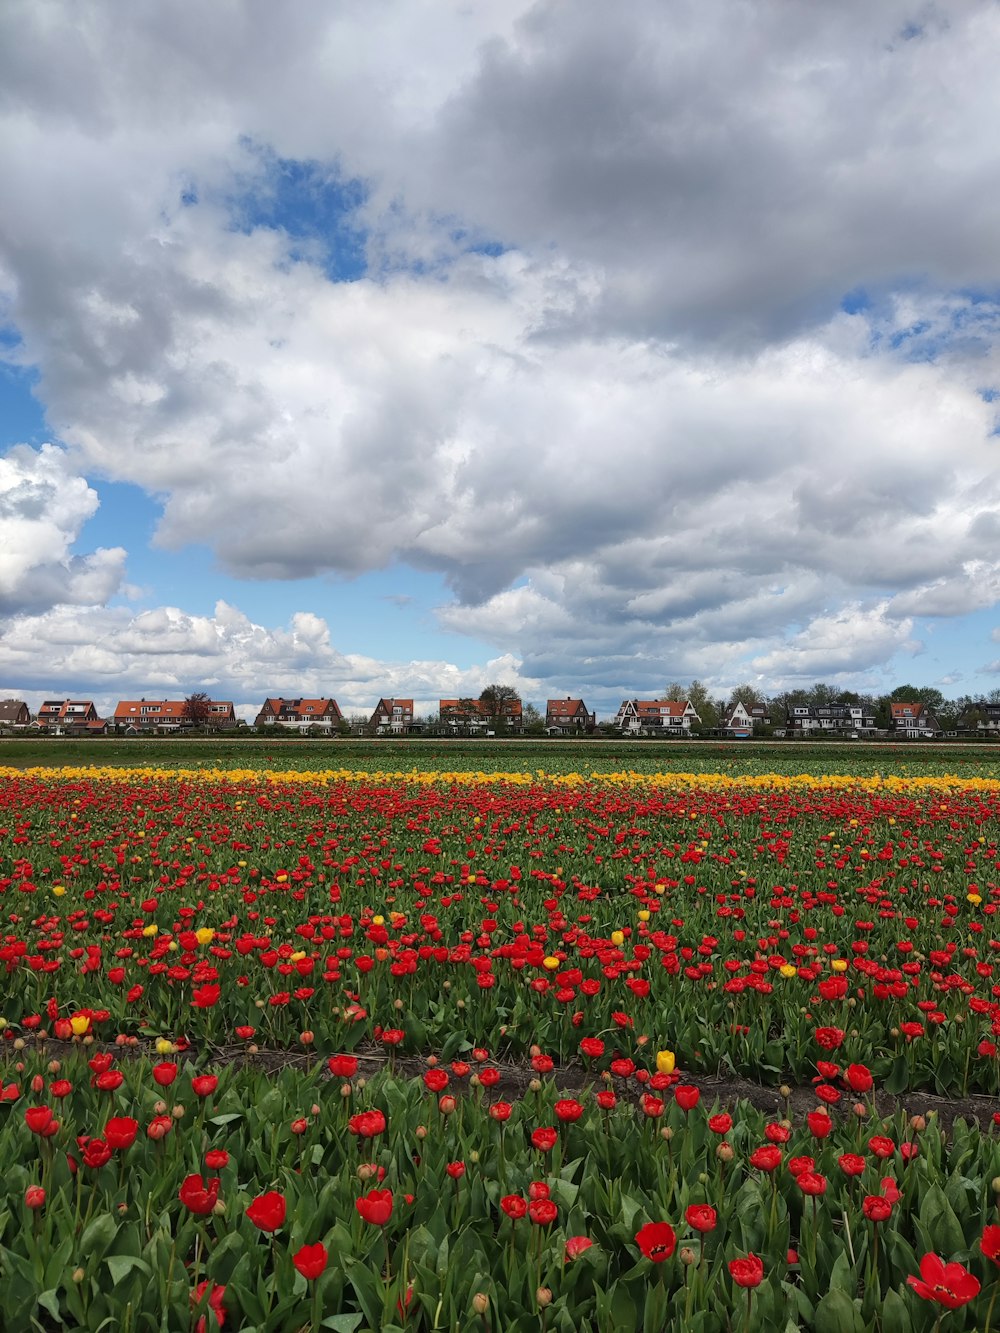 a field full of red and yellow flowers under a cloudy sky